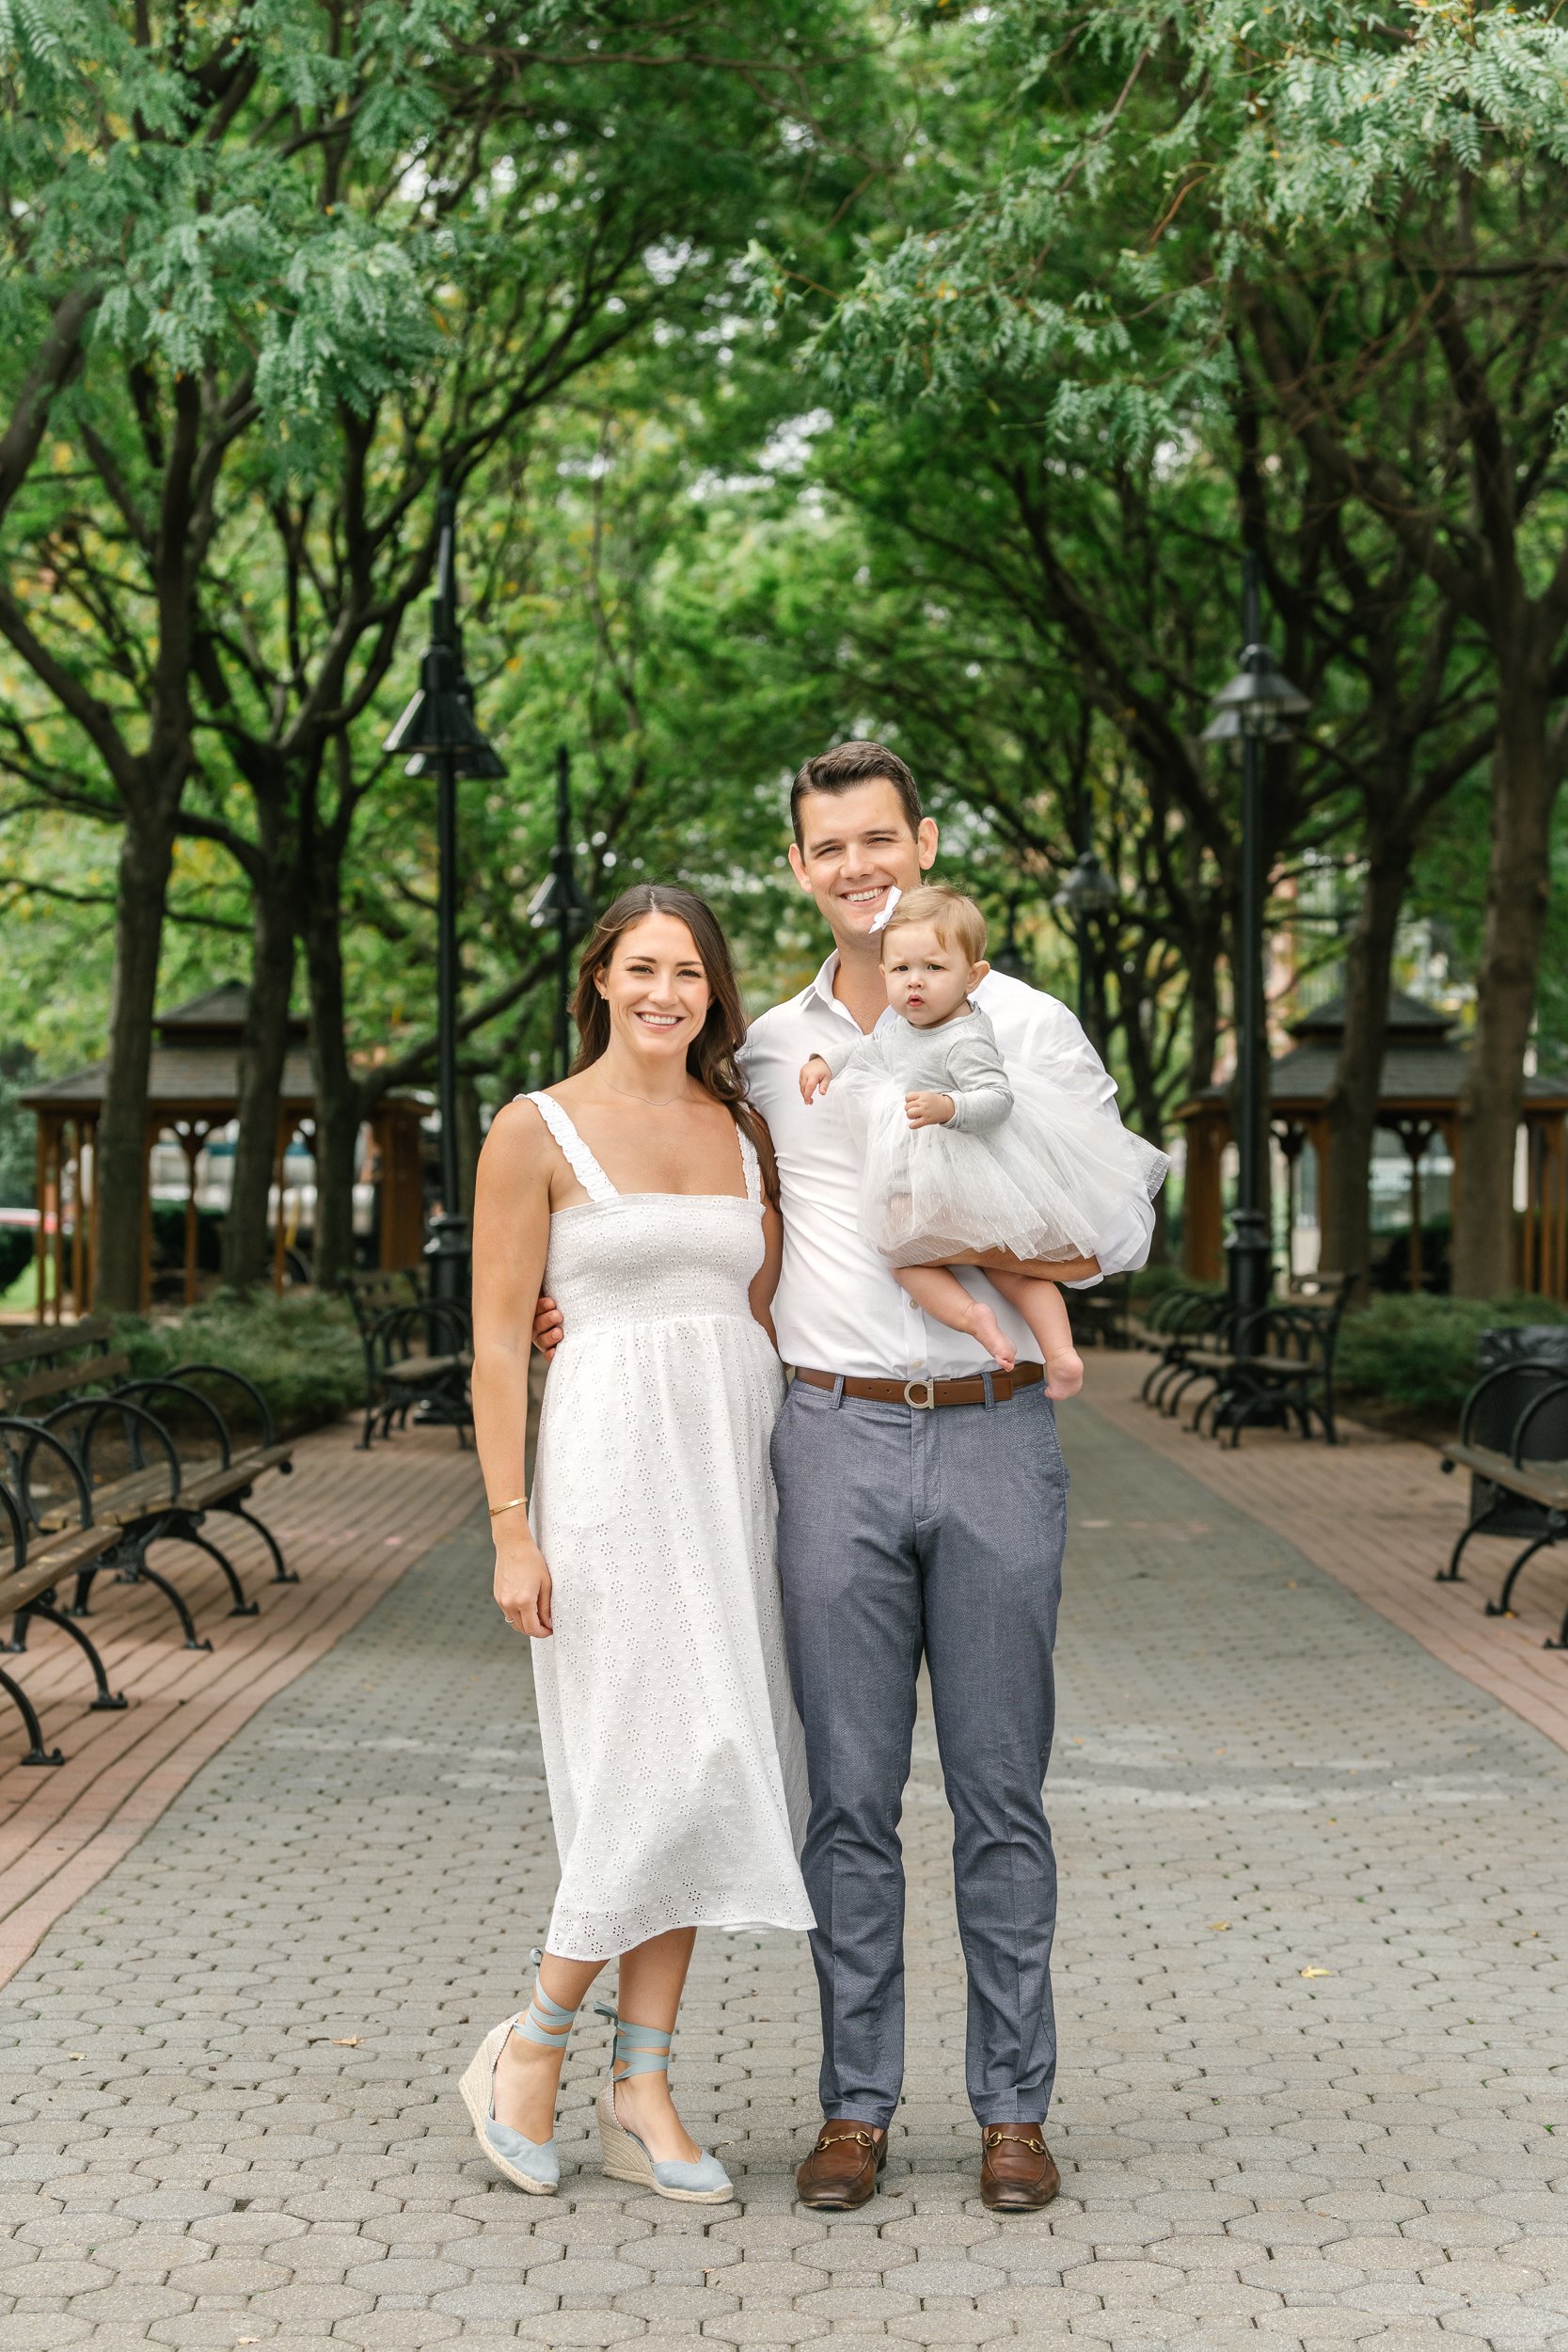  On a green paved park pathway, a young family takes portraits all in white with Nicole Hawkins Photography. park family pic family with a daughter #nicolehawkinsphotography #newjerseyphotographers #familyphotographer #6monthportraits #NJfamilyphotos